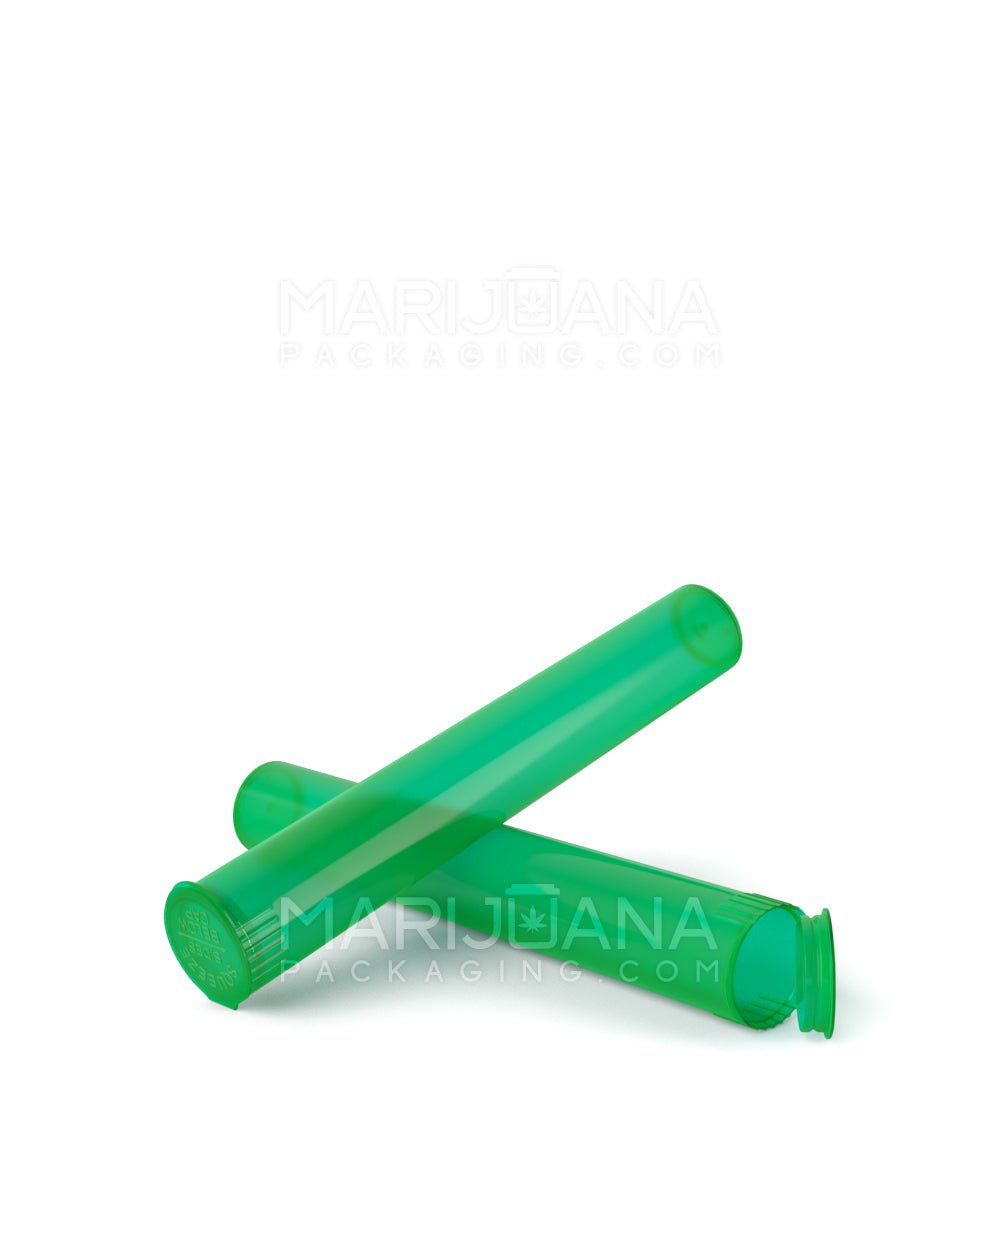 Child Resistant | King Size Pop Top Translucent Plastic Pre-Roll Tubes | 116mm - Green - 1000 Count - 5